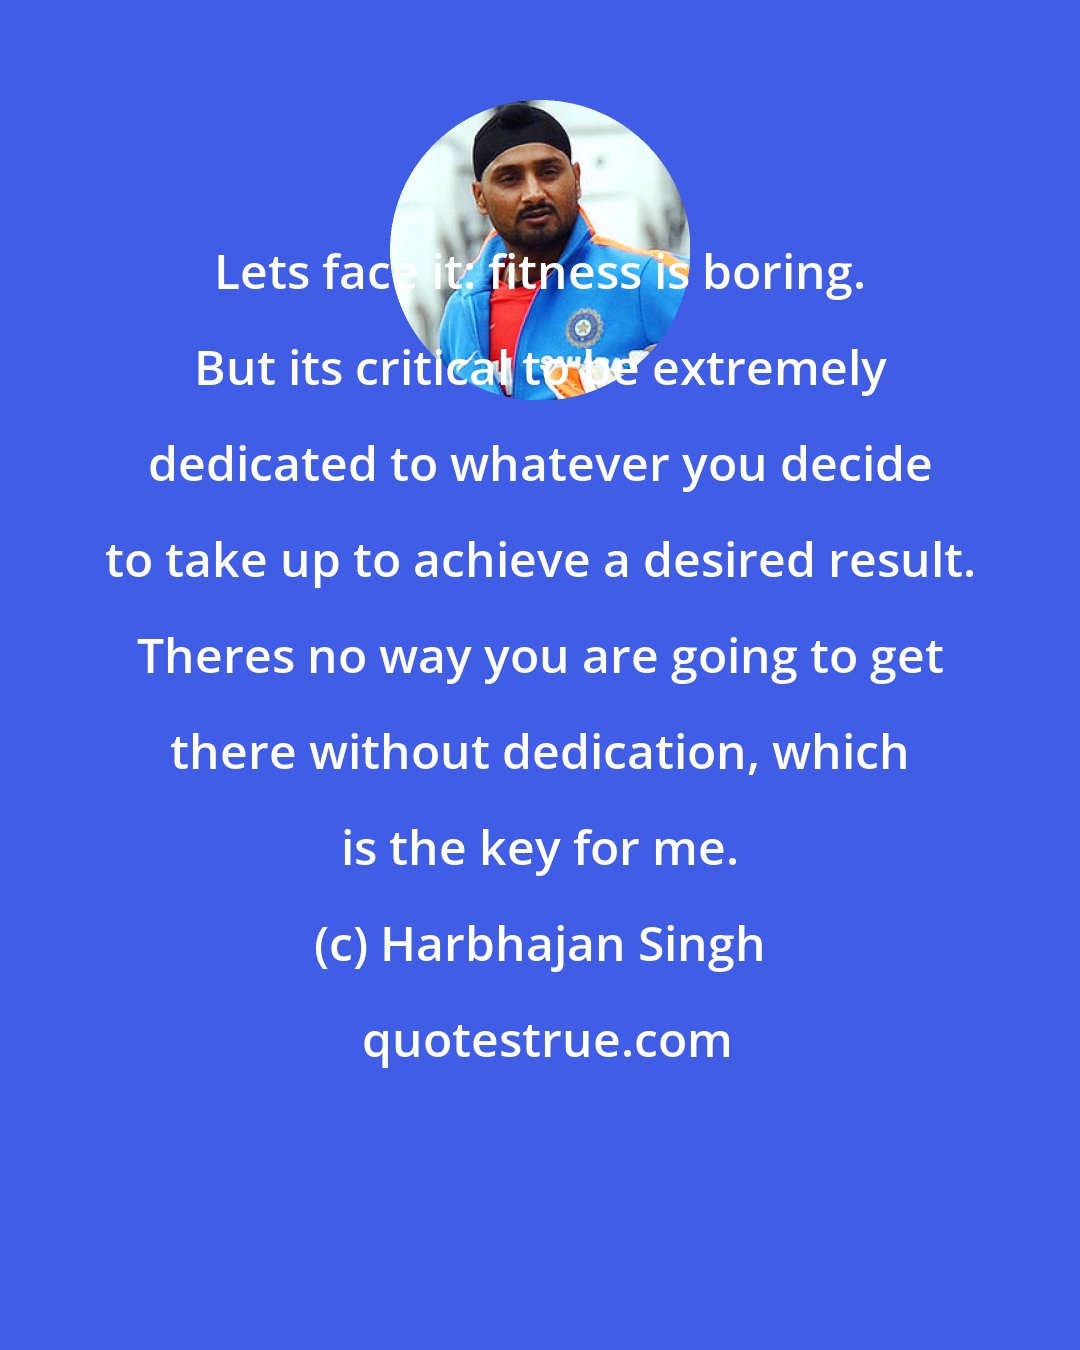 Harbhajan Singh: Lets face it: fitness is boring. But its critical to be extremely dedicated to whatever you decide to take up to achieve a desired result. Theres no way you are going to get there without dedication, which is the key for me.